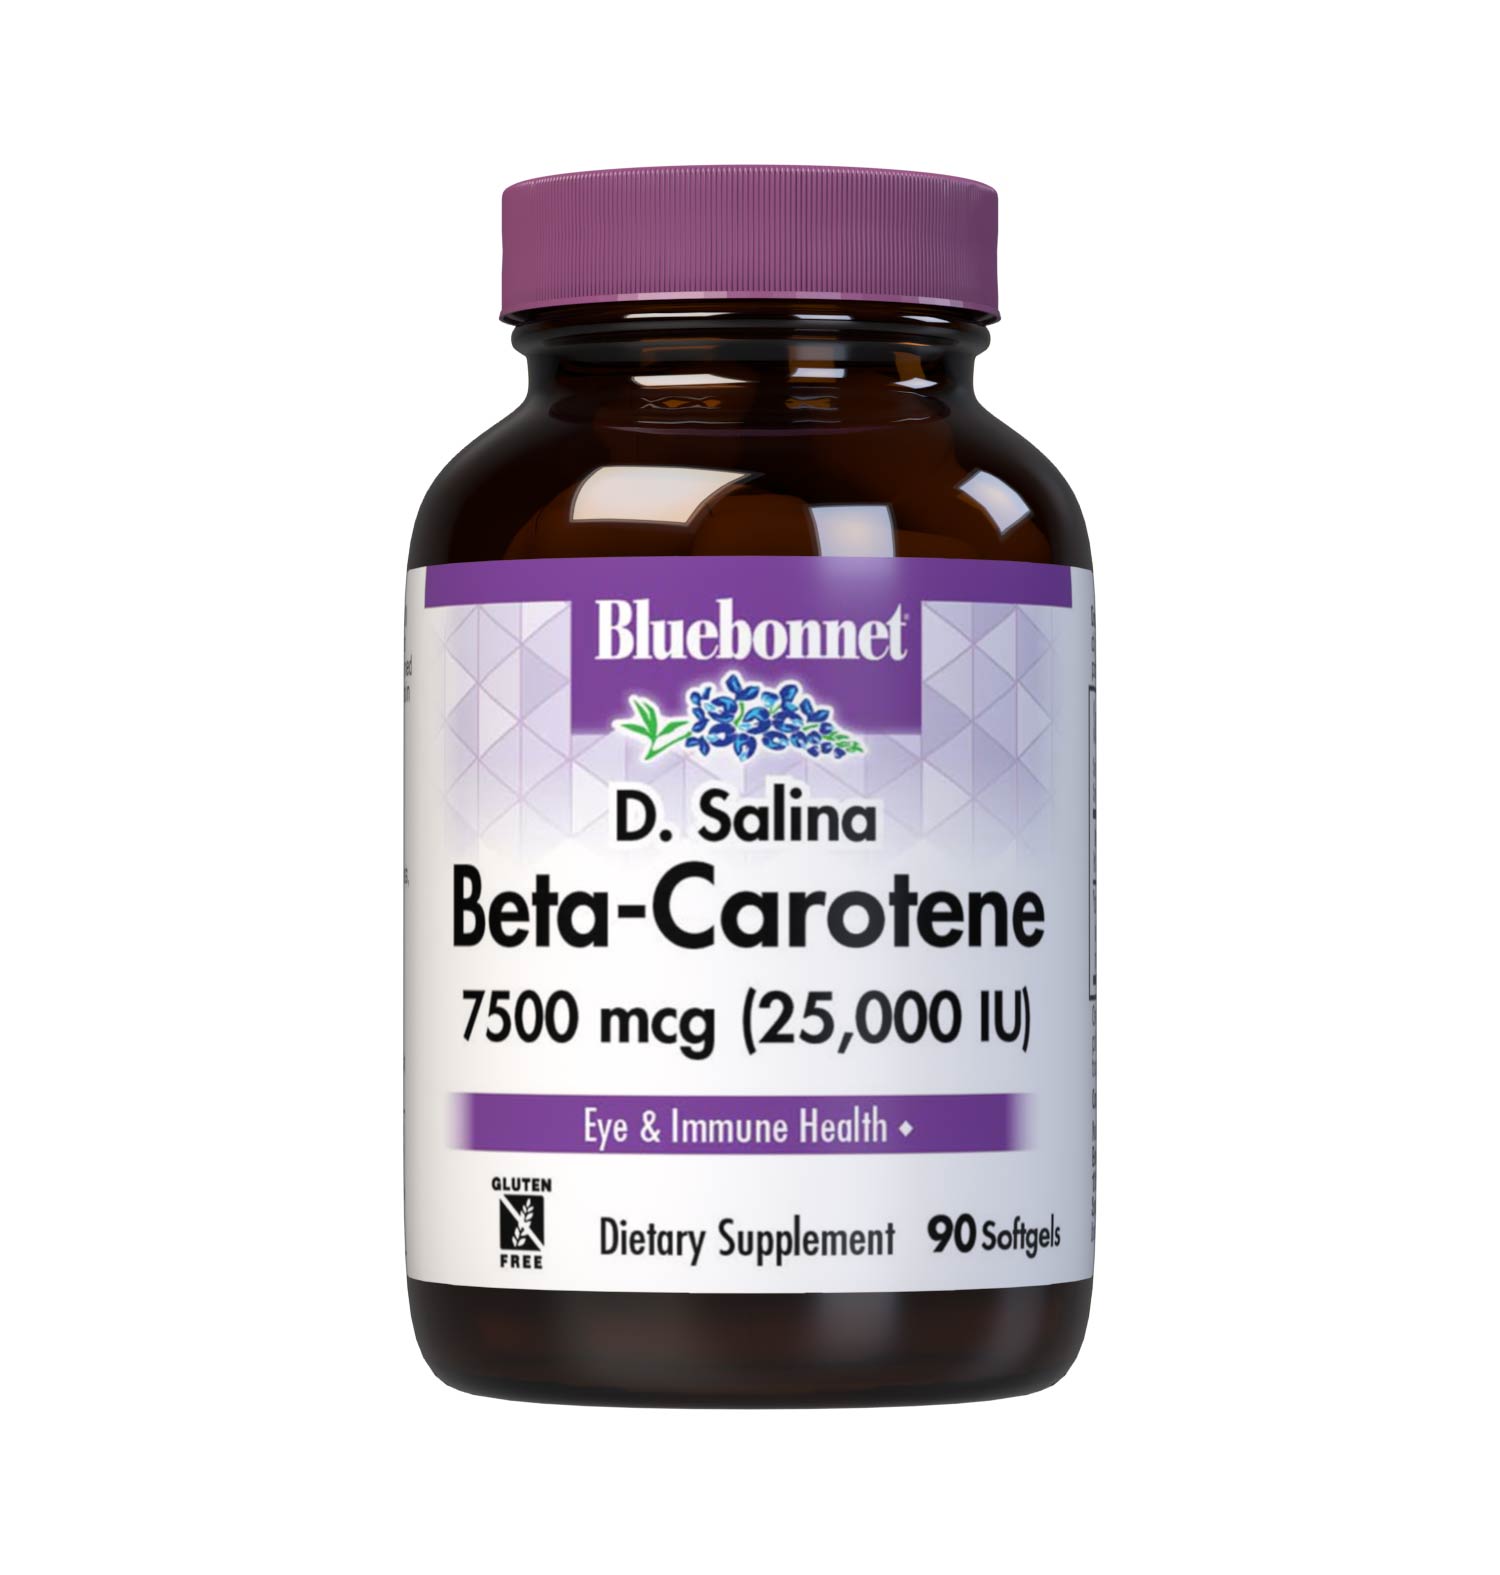 Bluebonnet’s D. Salina Beta-Carotene 25,000 IU (3750 mcg) Softgels are formulated for eye health and immune support with Betatene, a source of beta-carotene along with other mixed carotenoids including alpha-carotene, zeaxanthin, lutein and cryptoxanthin from the algae Dunaliella salina harvested in the crystal clean lakes of Whyalla, Australia. #size_90 count